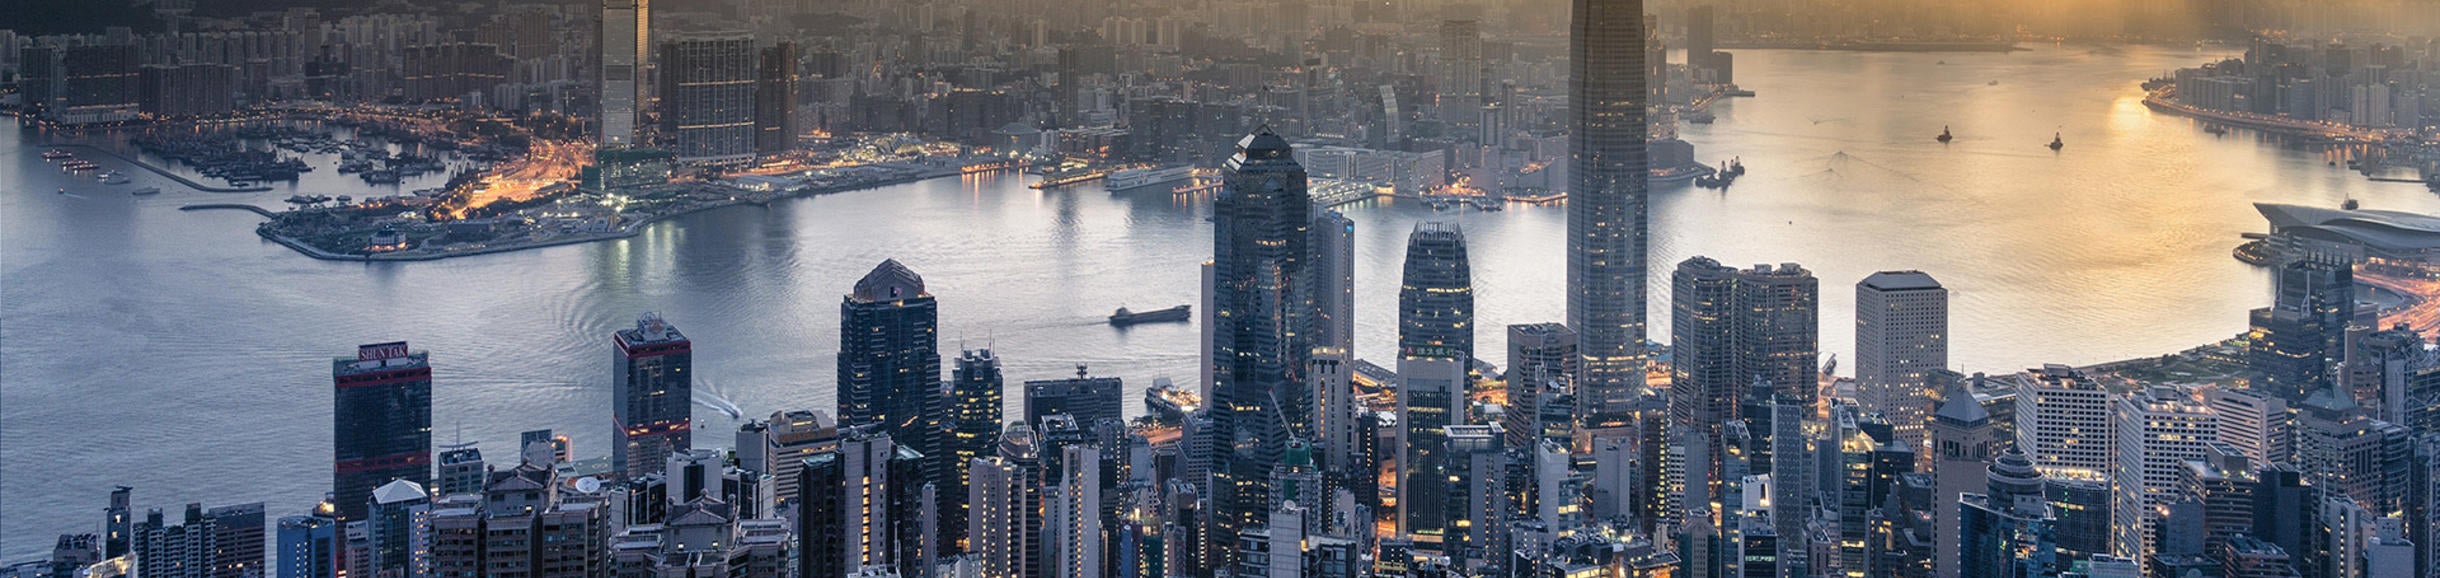 Aerial view of Hong Kong during the day